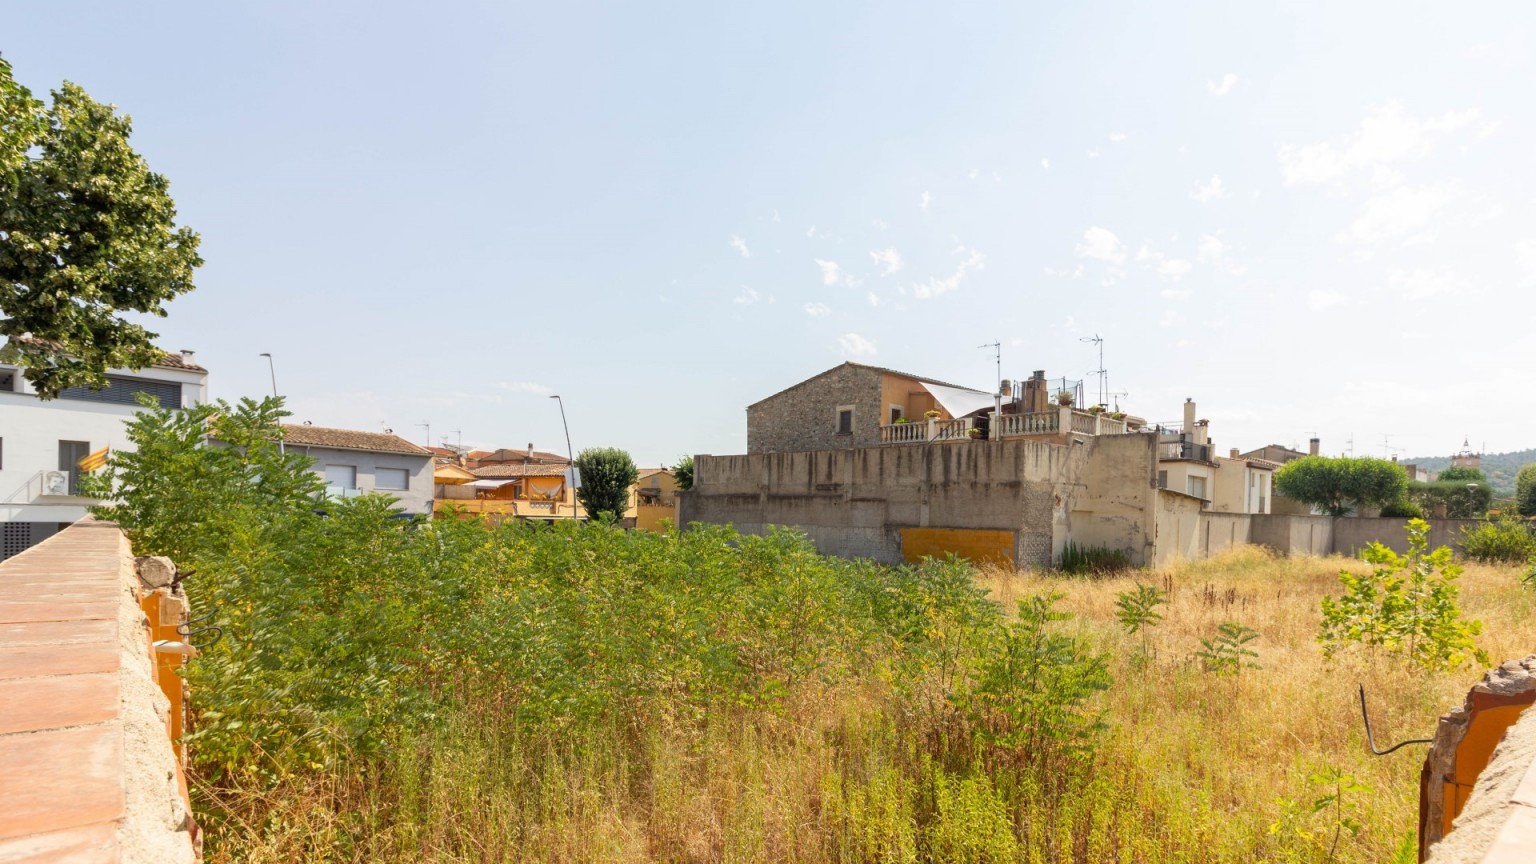 Building plot for sale, located in Bescanó